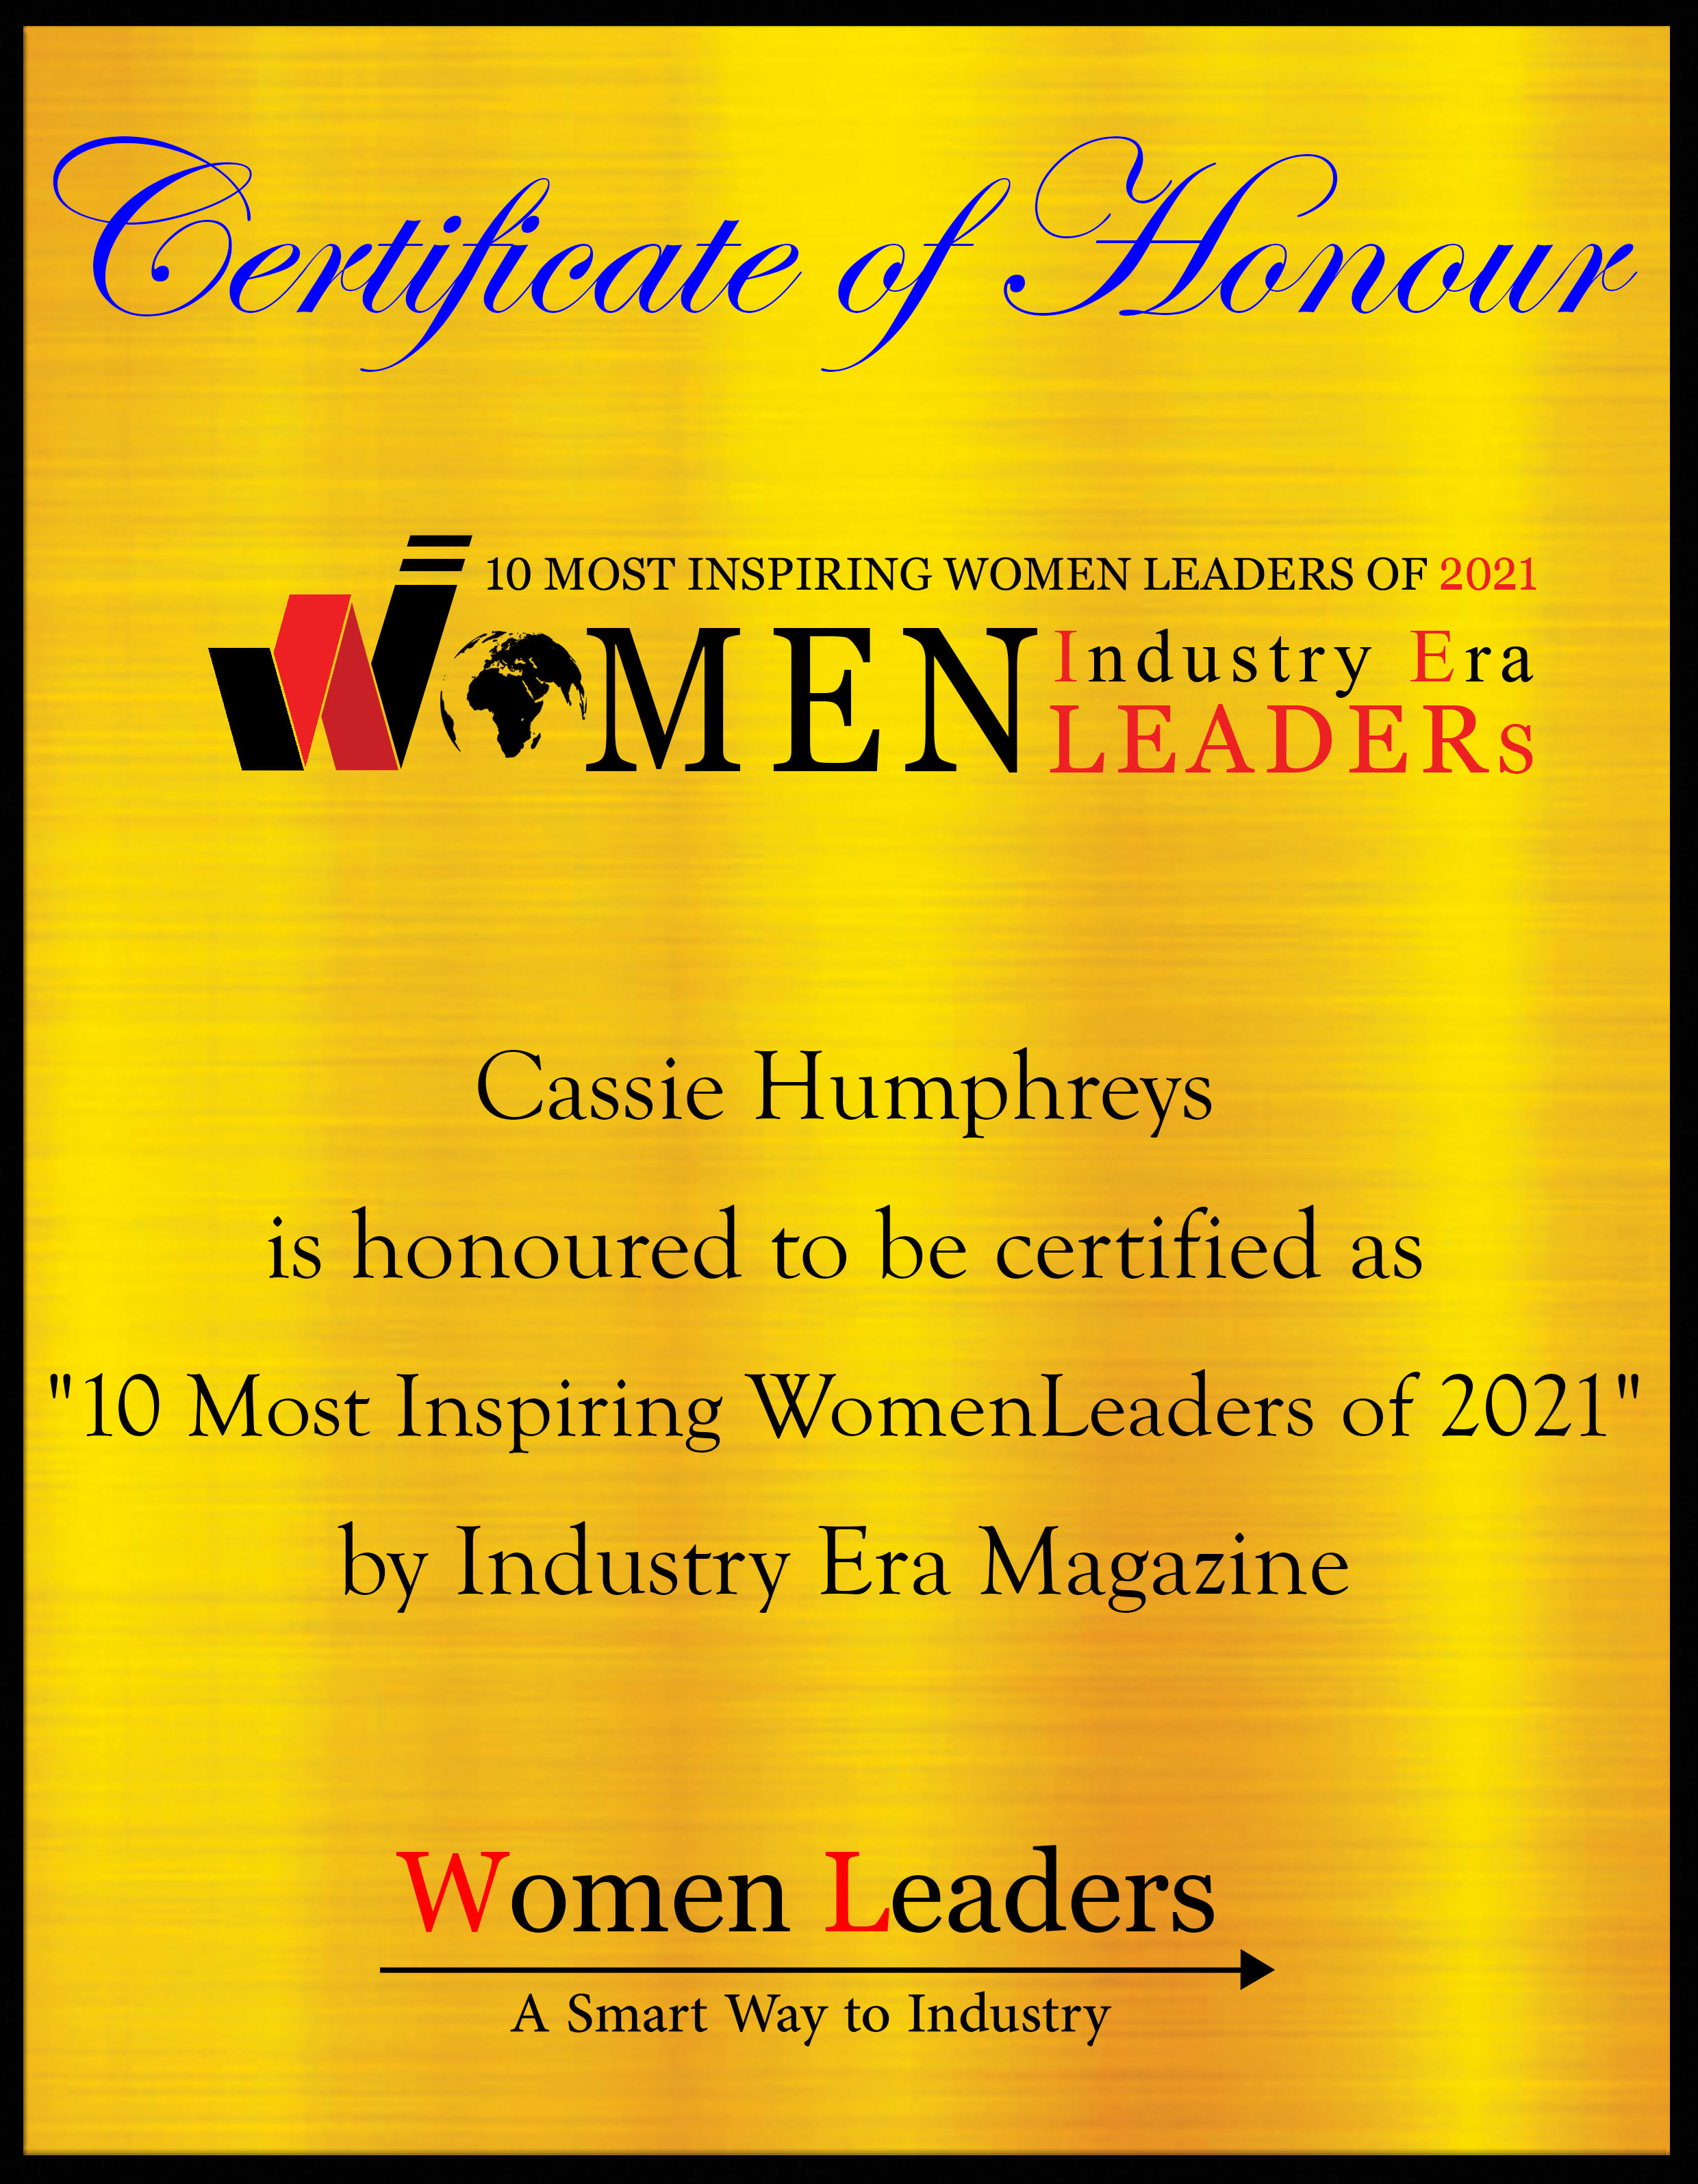 Cassie Humphreys, Executive Vice President of MIMS, Most Inspiring WomenLeaders of 2021